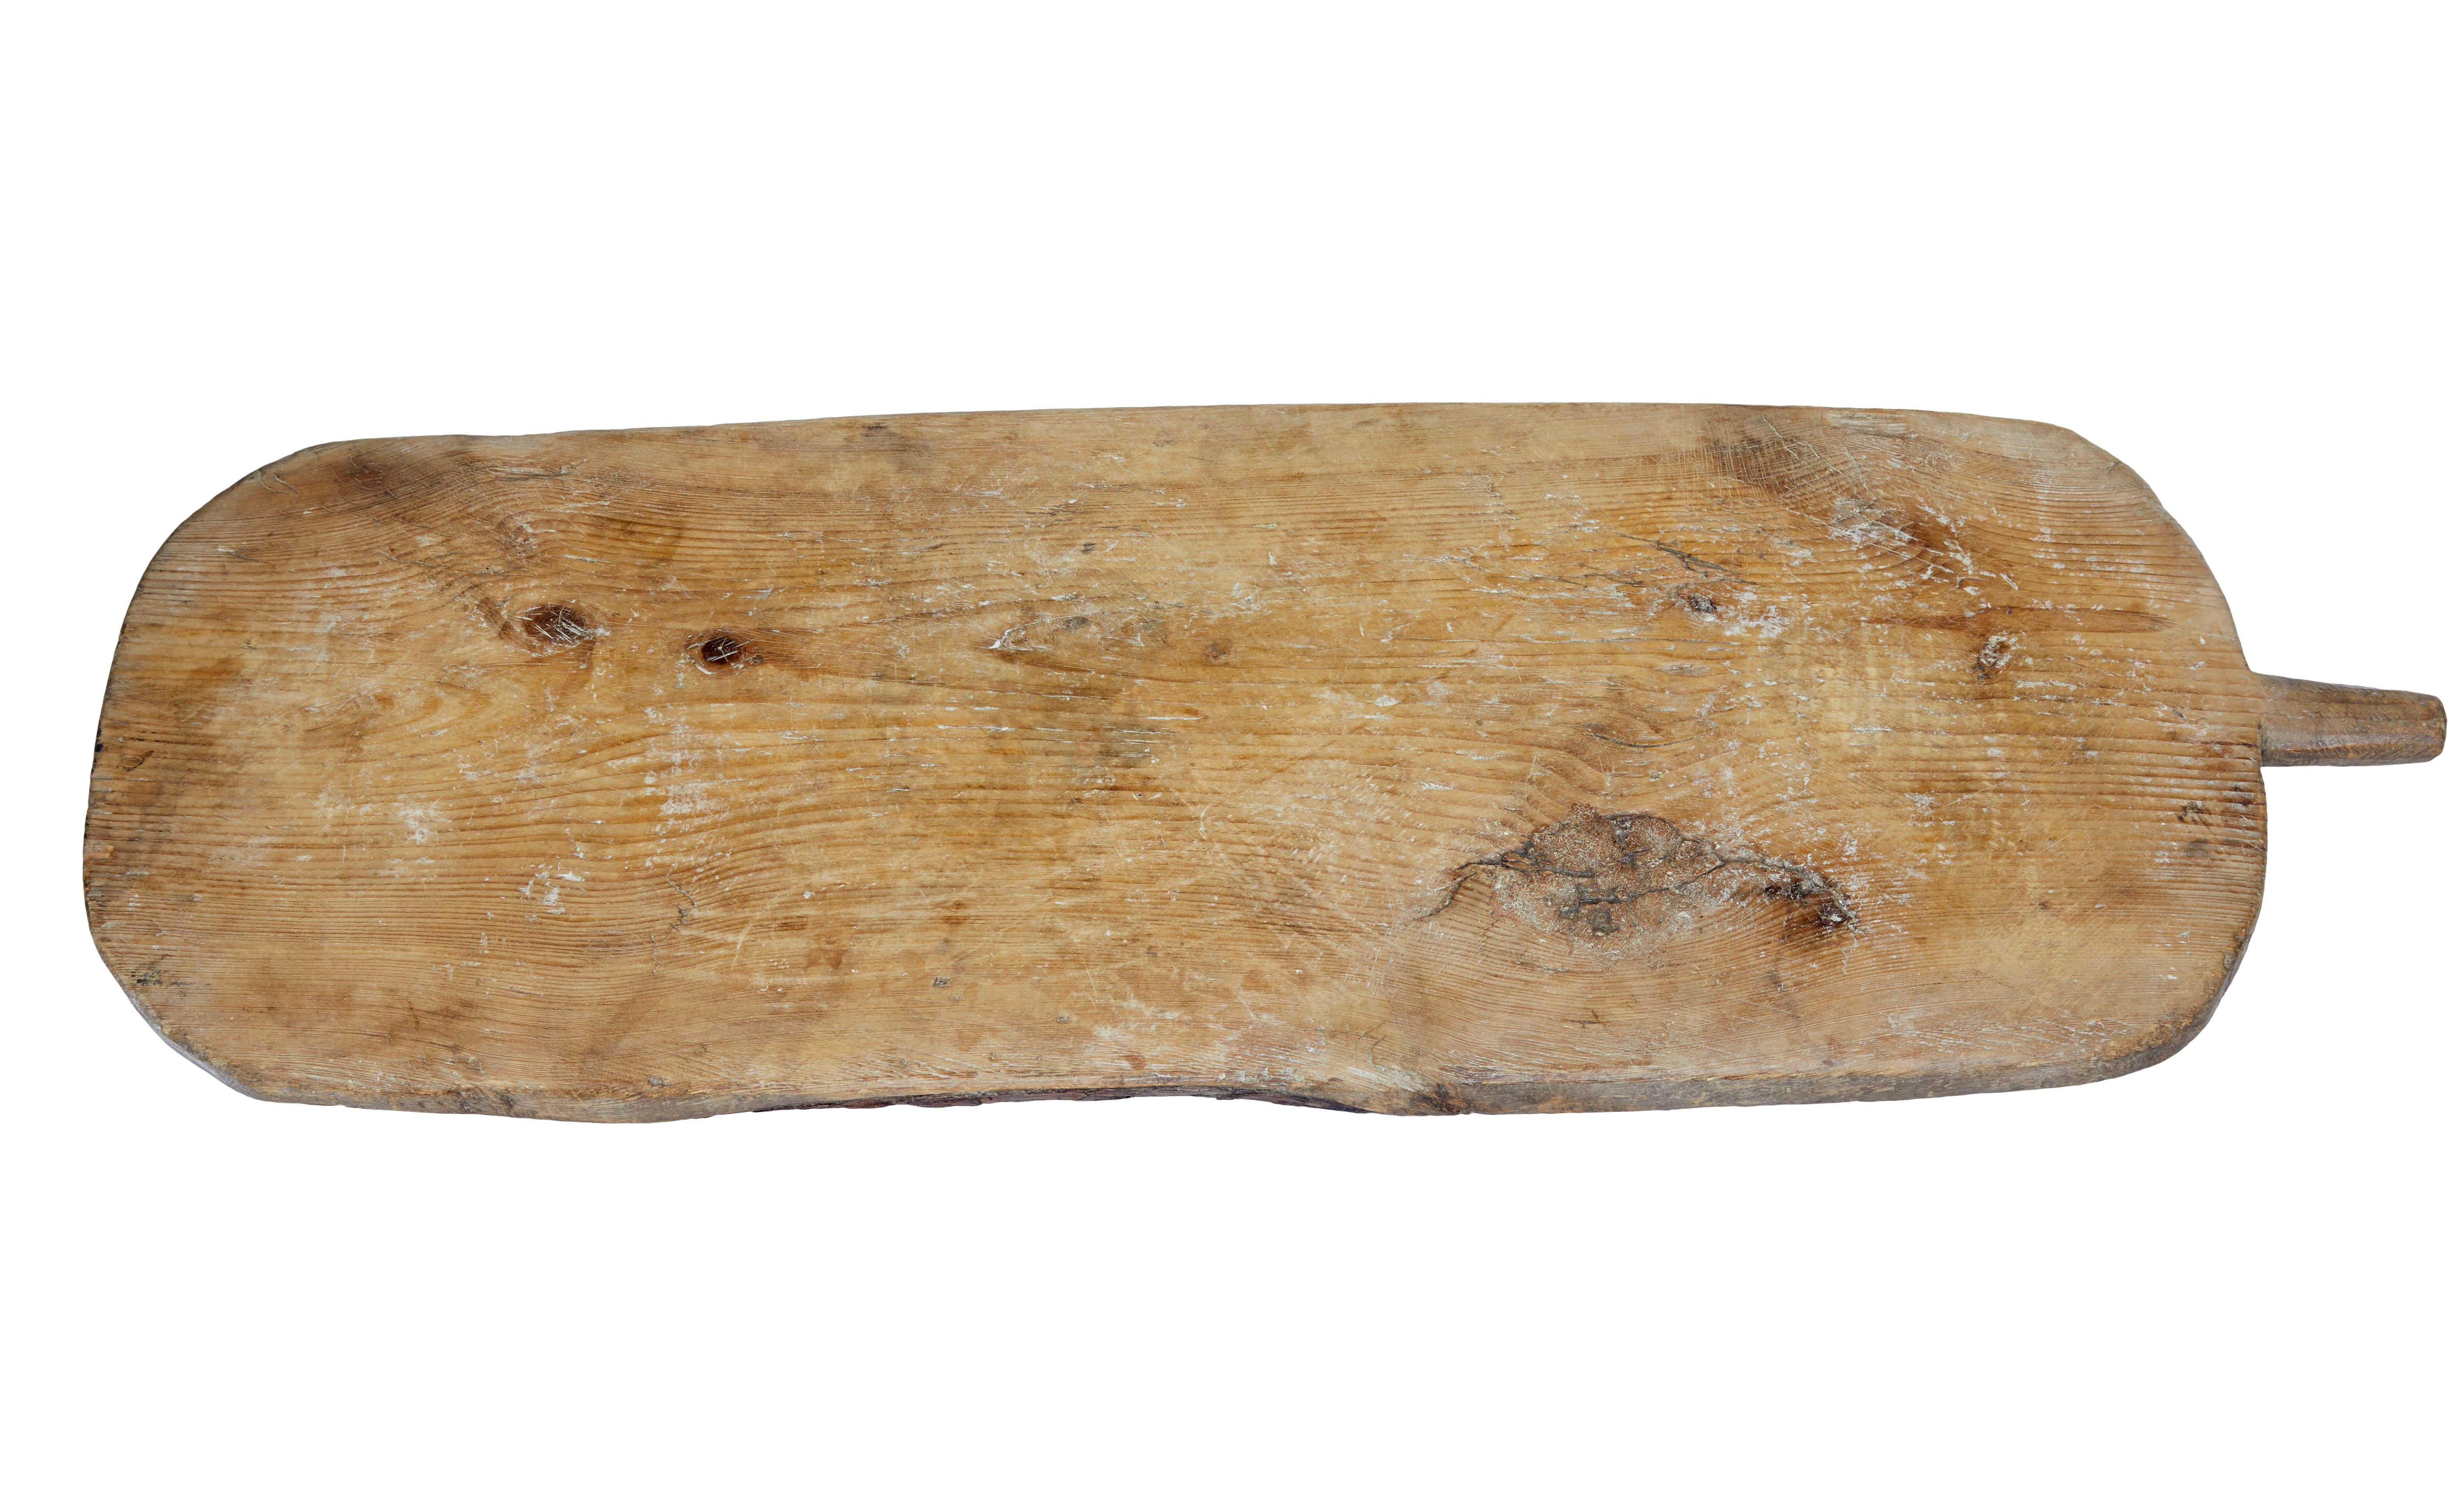 19th century rustic Swedish bread / chopping board, circa 1880.

Piece of traditional Swedish table wear, now ideal for a table serving center piece or platter.

Rectangular main shape with handle, carved legs in the solid on the